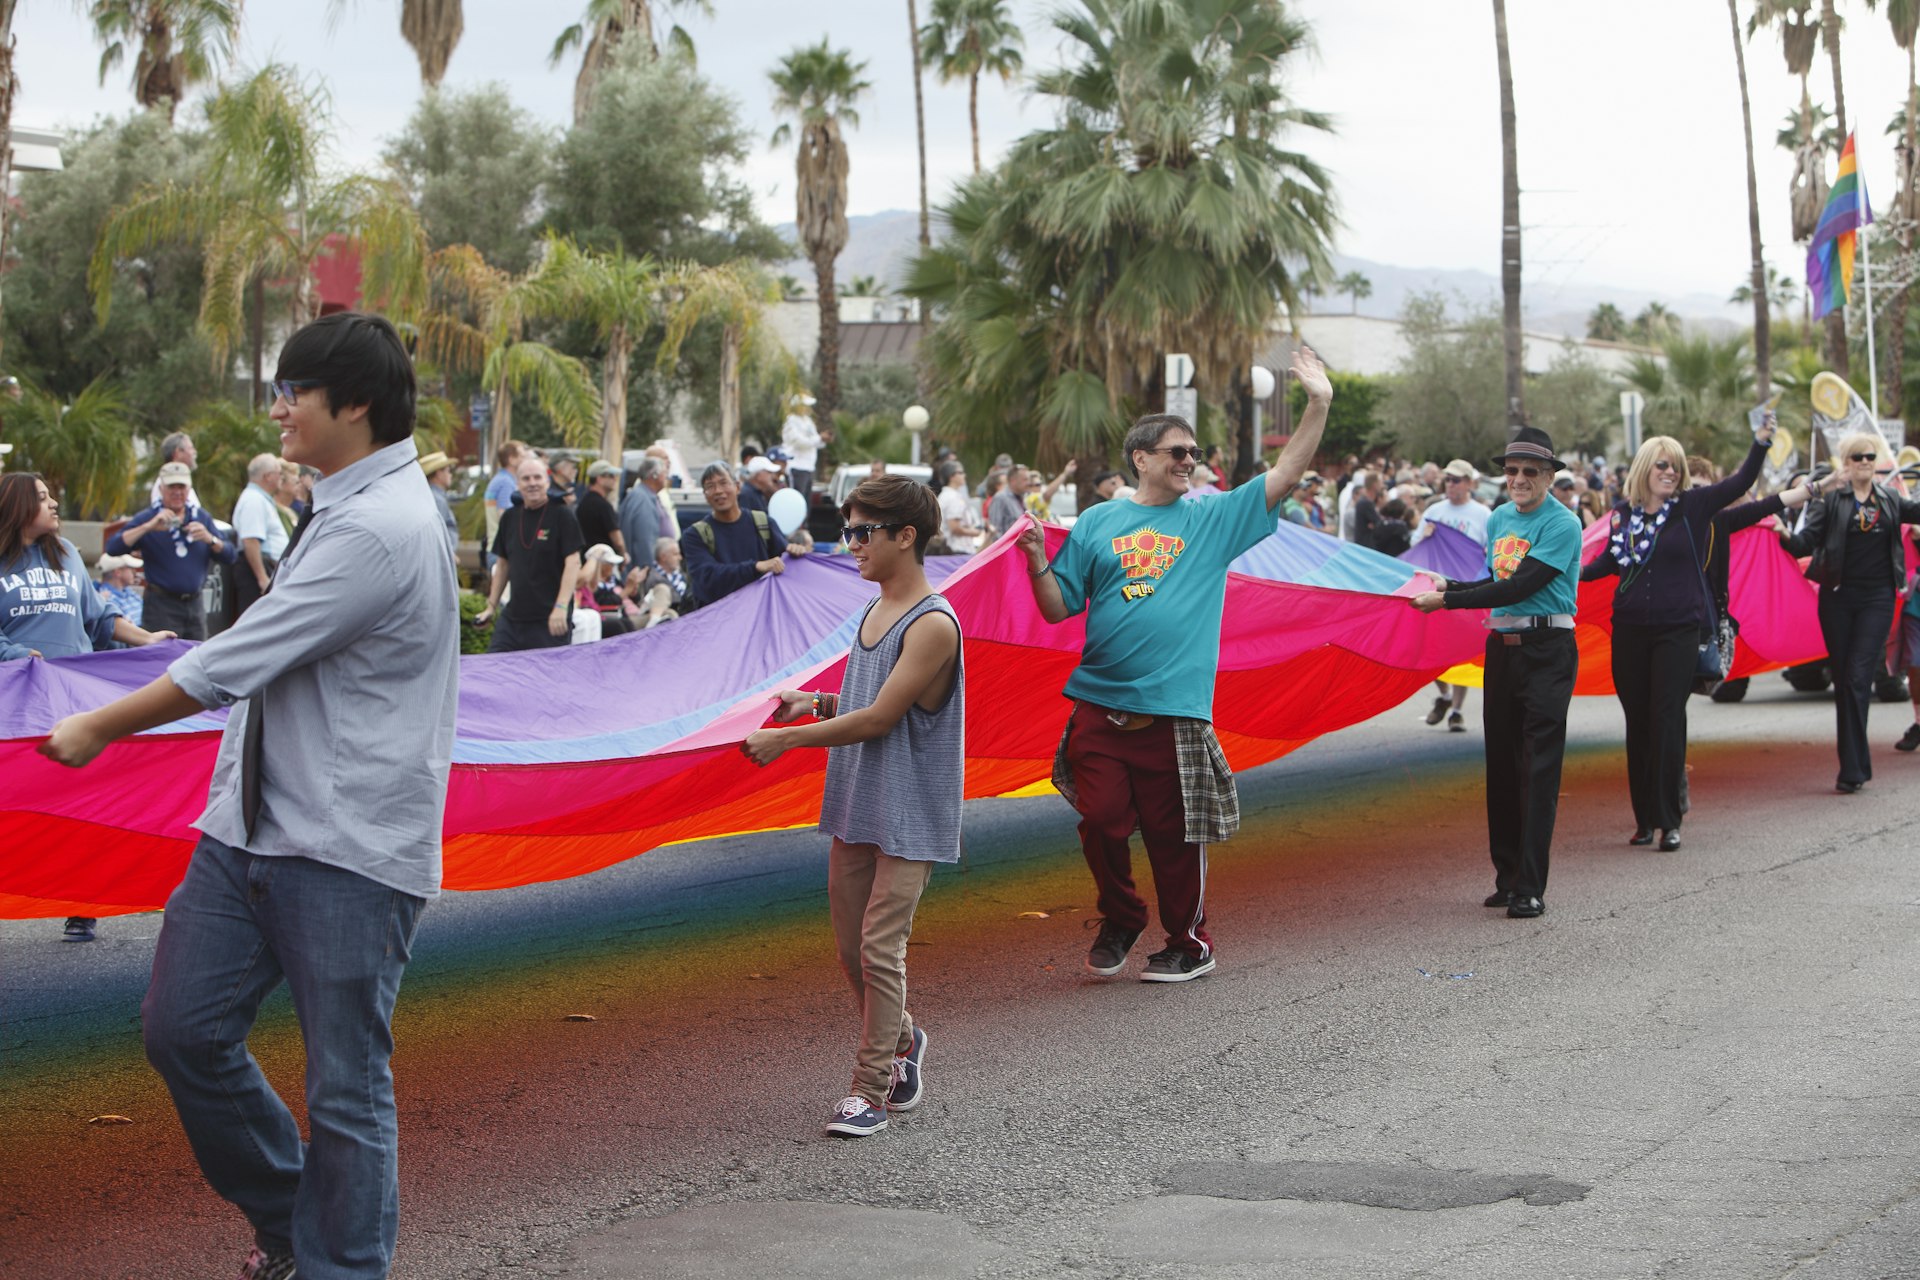 A 600-foot rainbow pride flag is marched through Palm Springs as part of Palm Springs' annual Pride Fest